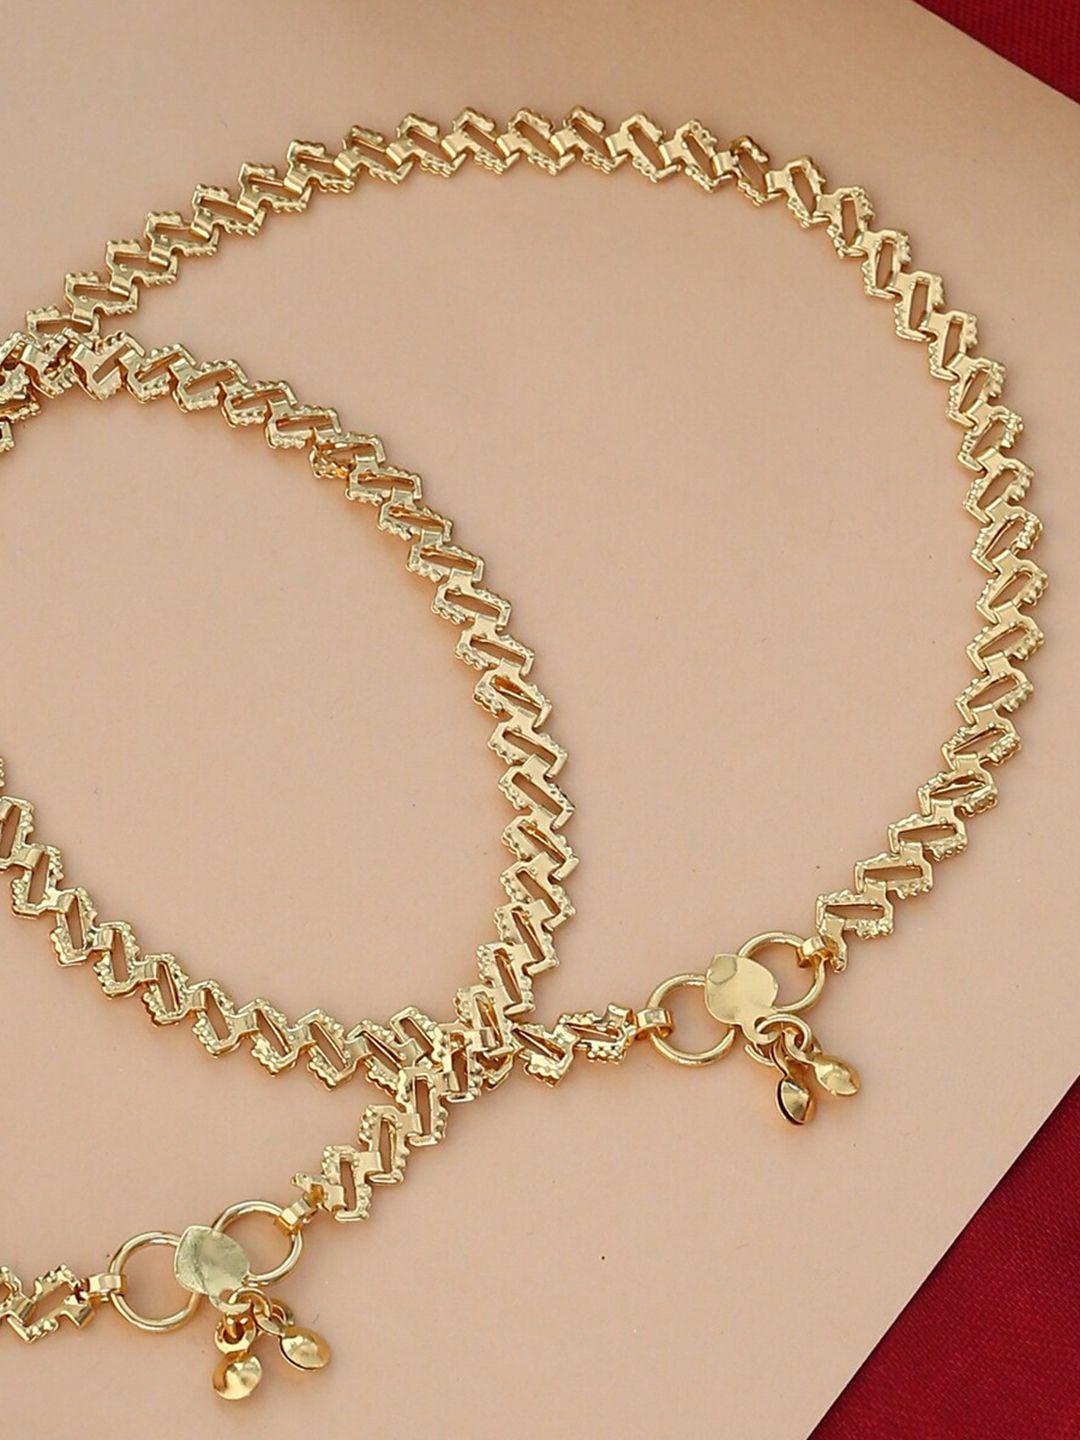 shoshaa pair of 2 gold-plated anklets